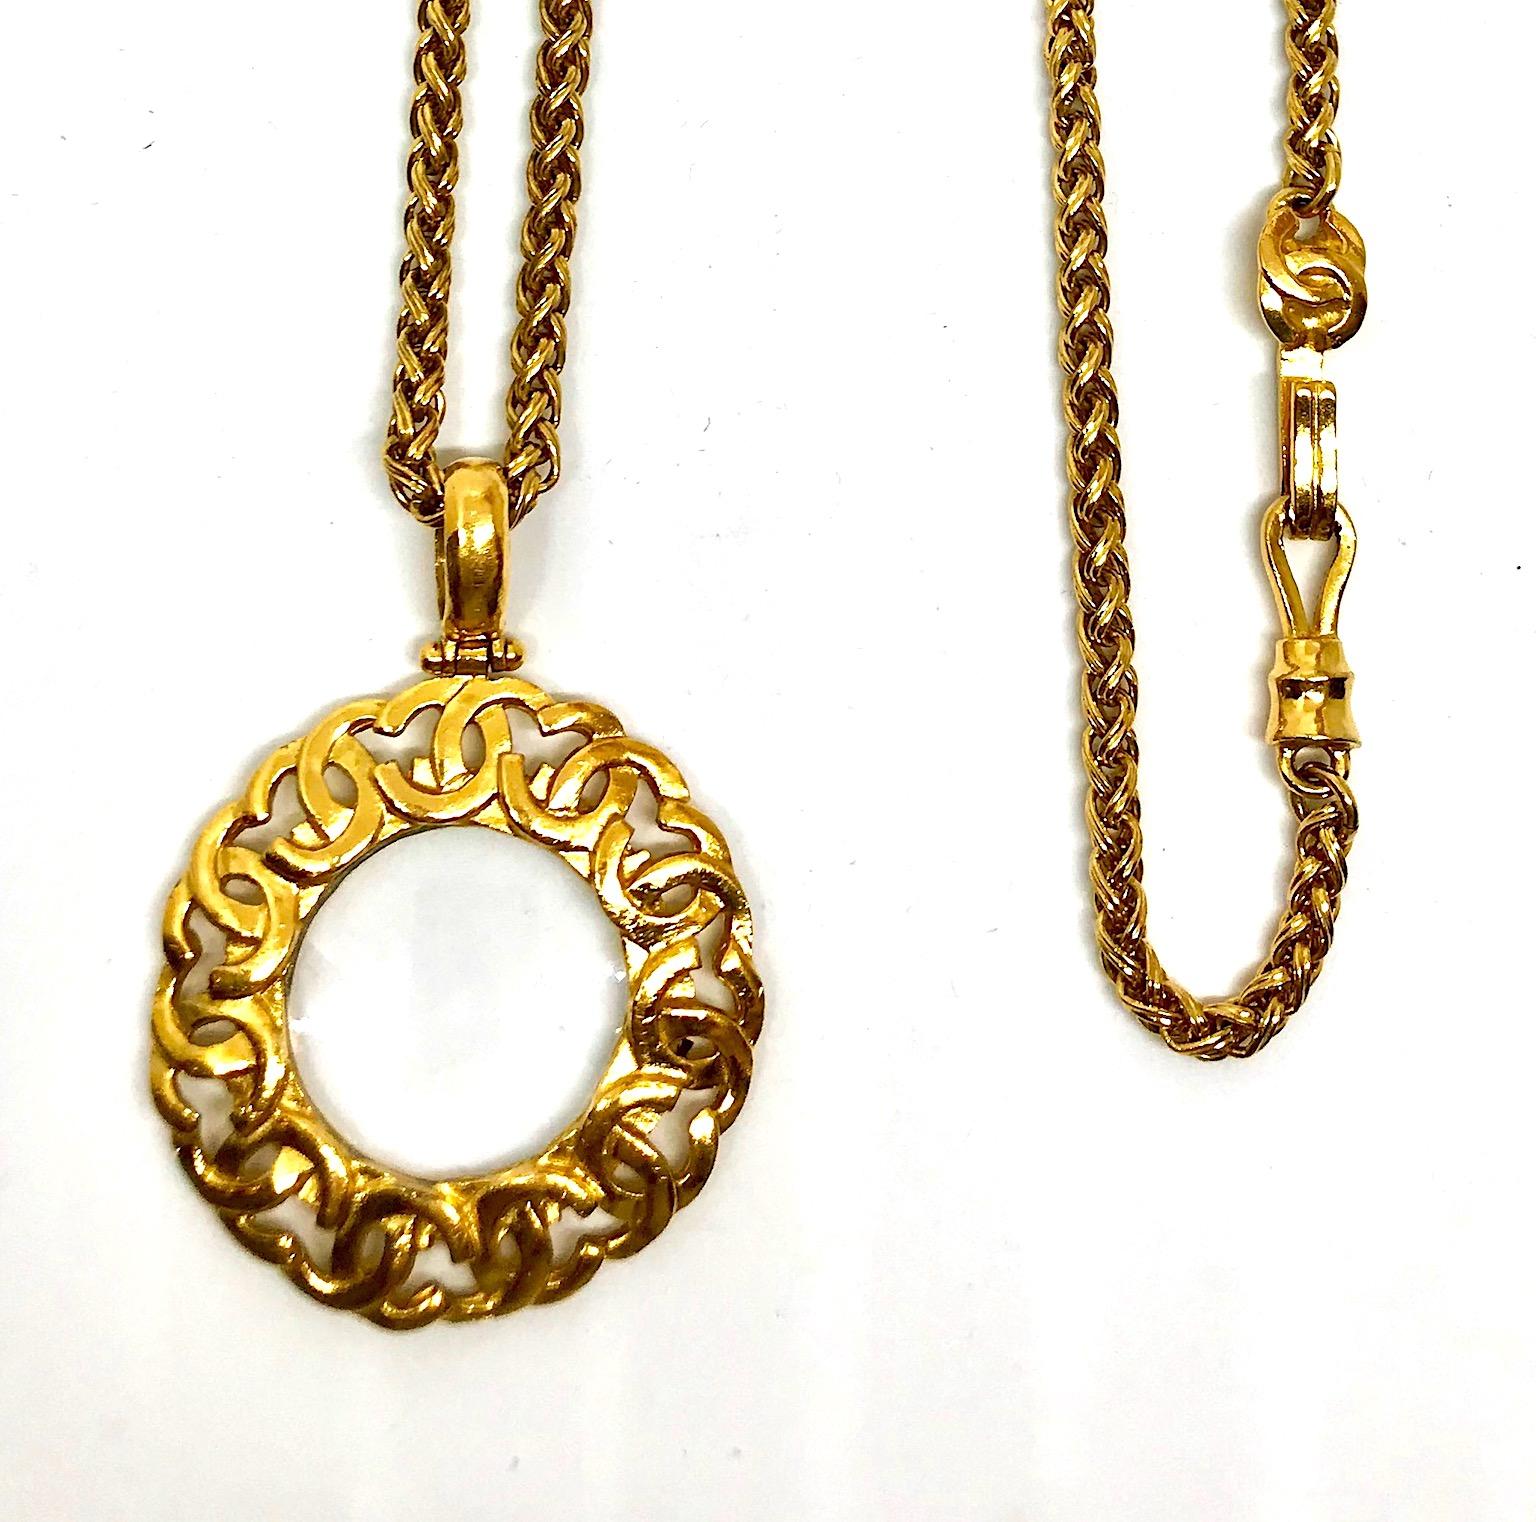 Chanel Magnifying Glass Pendant Necklace Autumn 1995 Collection 2